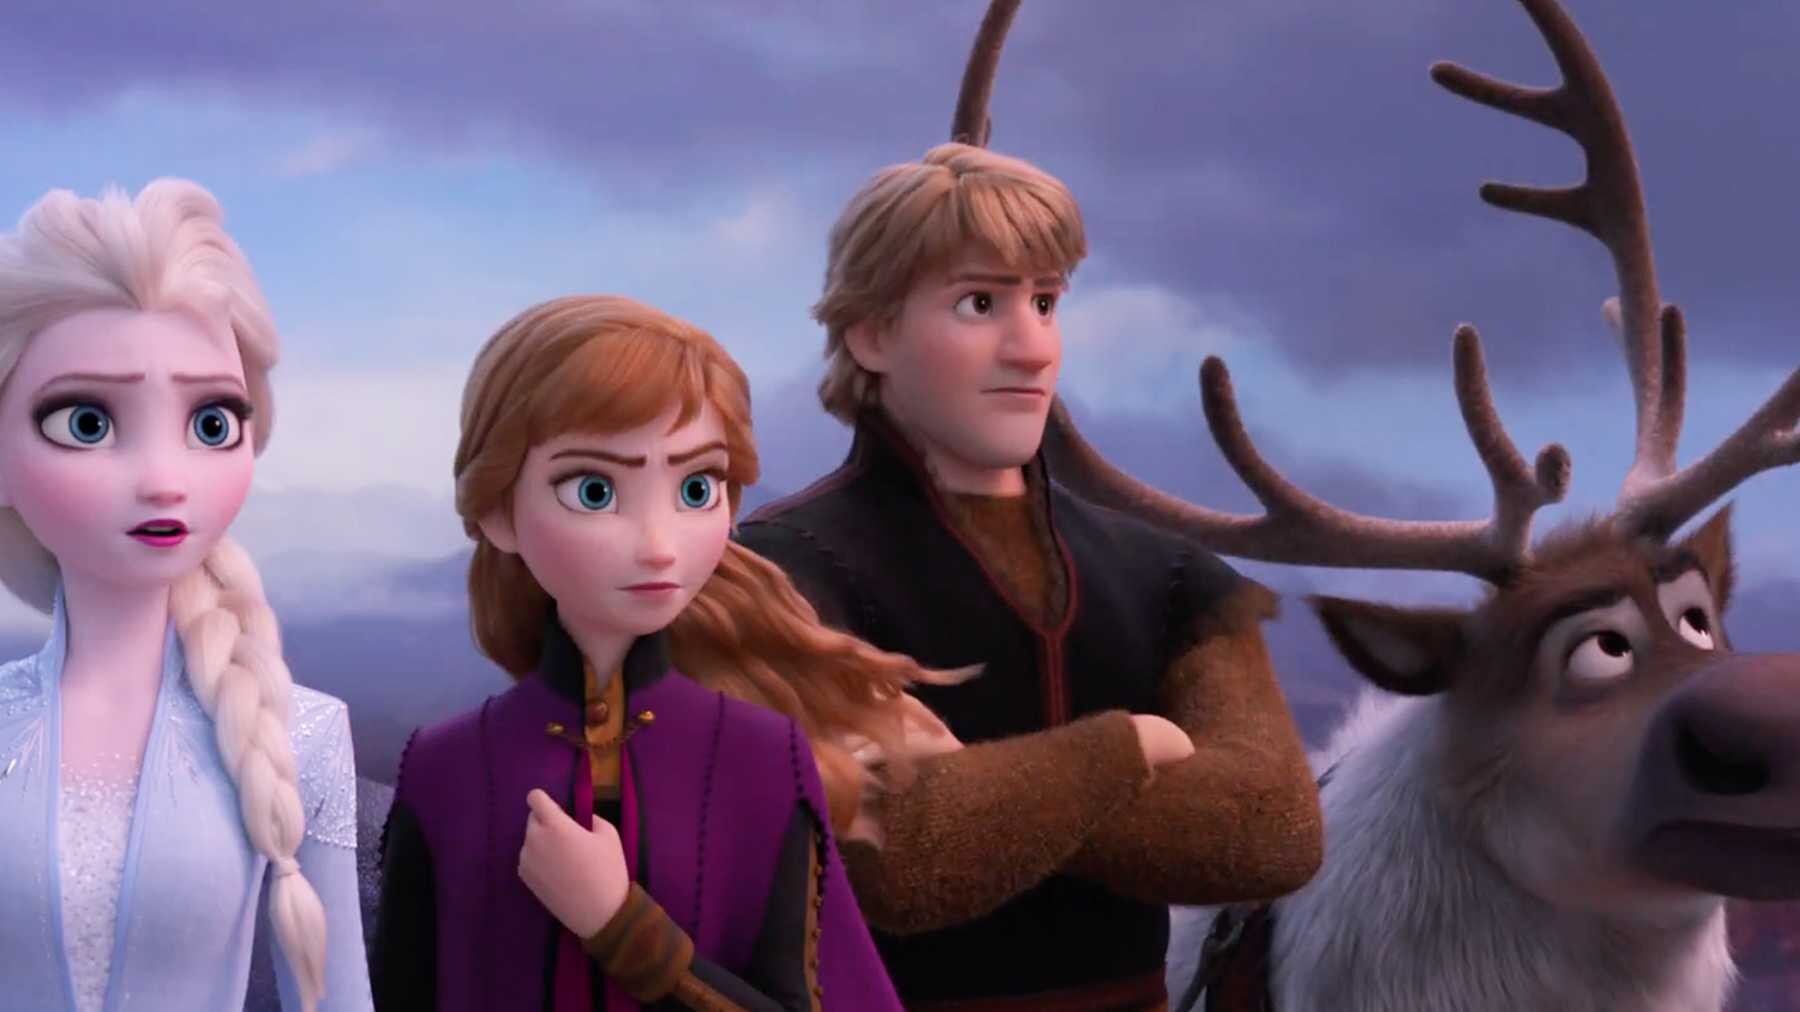 Details, Themes, and Foreshadowing in Frozen II (and some stuff